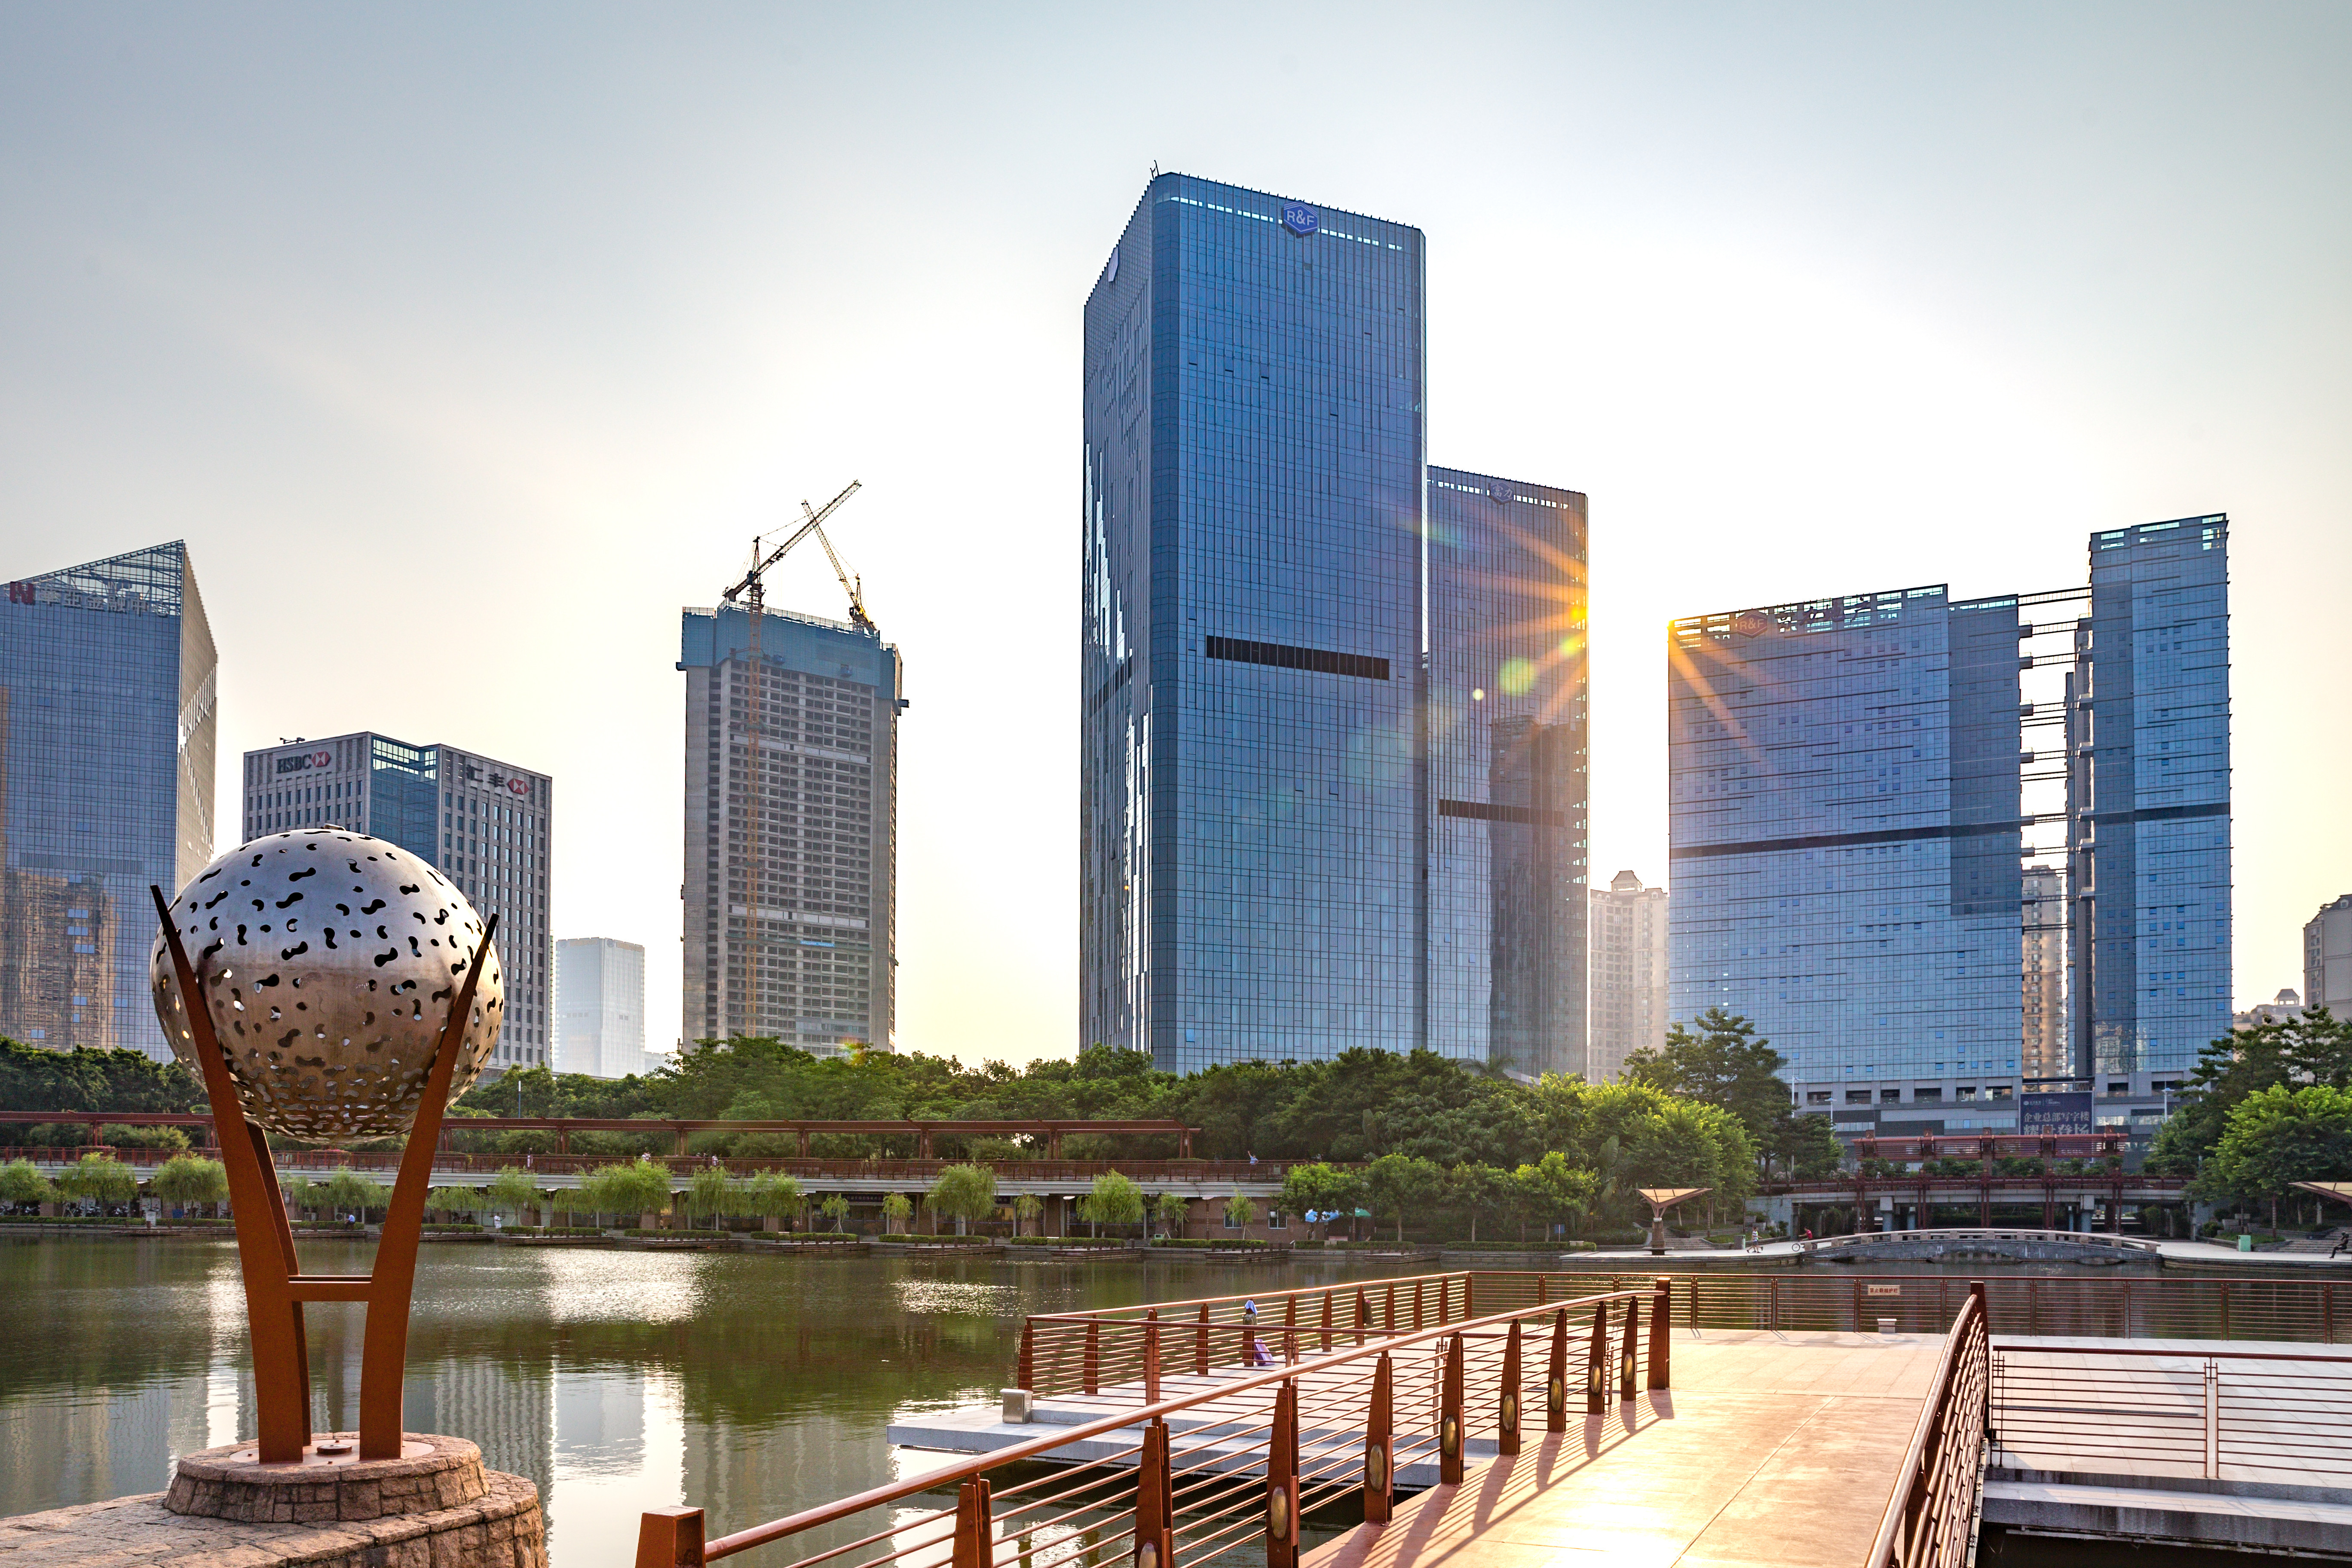 The cityscape of Foshan in Thousand Lantern Lake Park Area in Nanhai district. Photo: Shutterstock Images